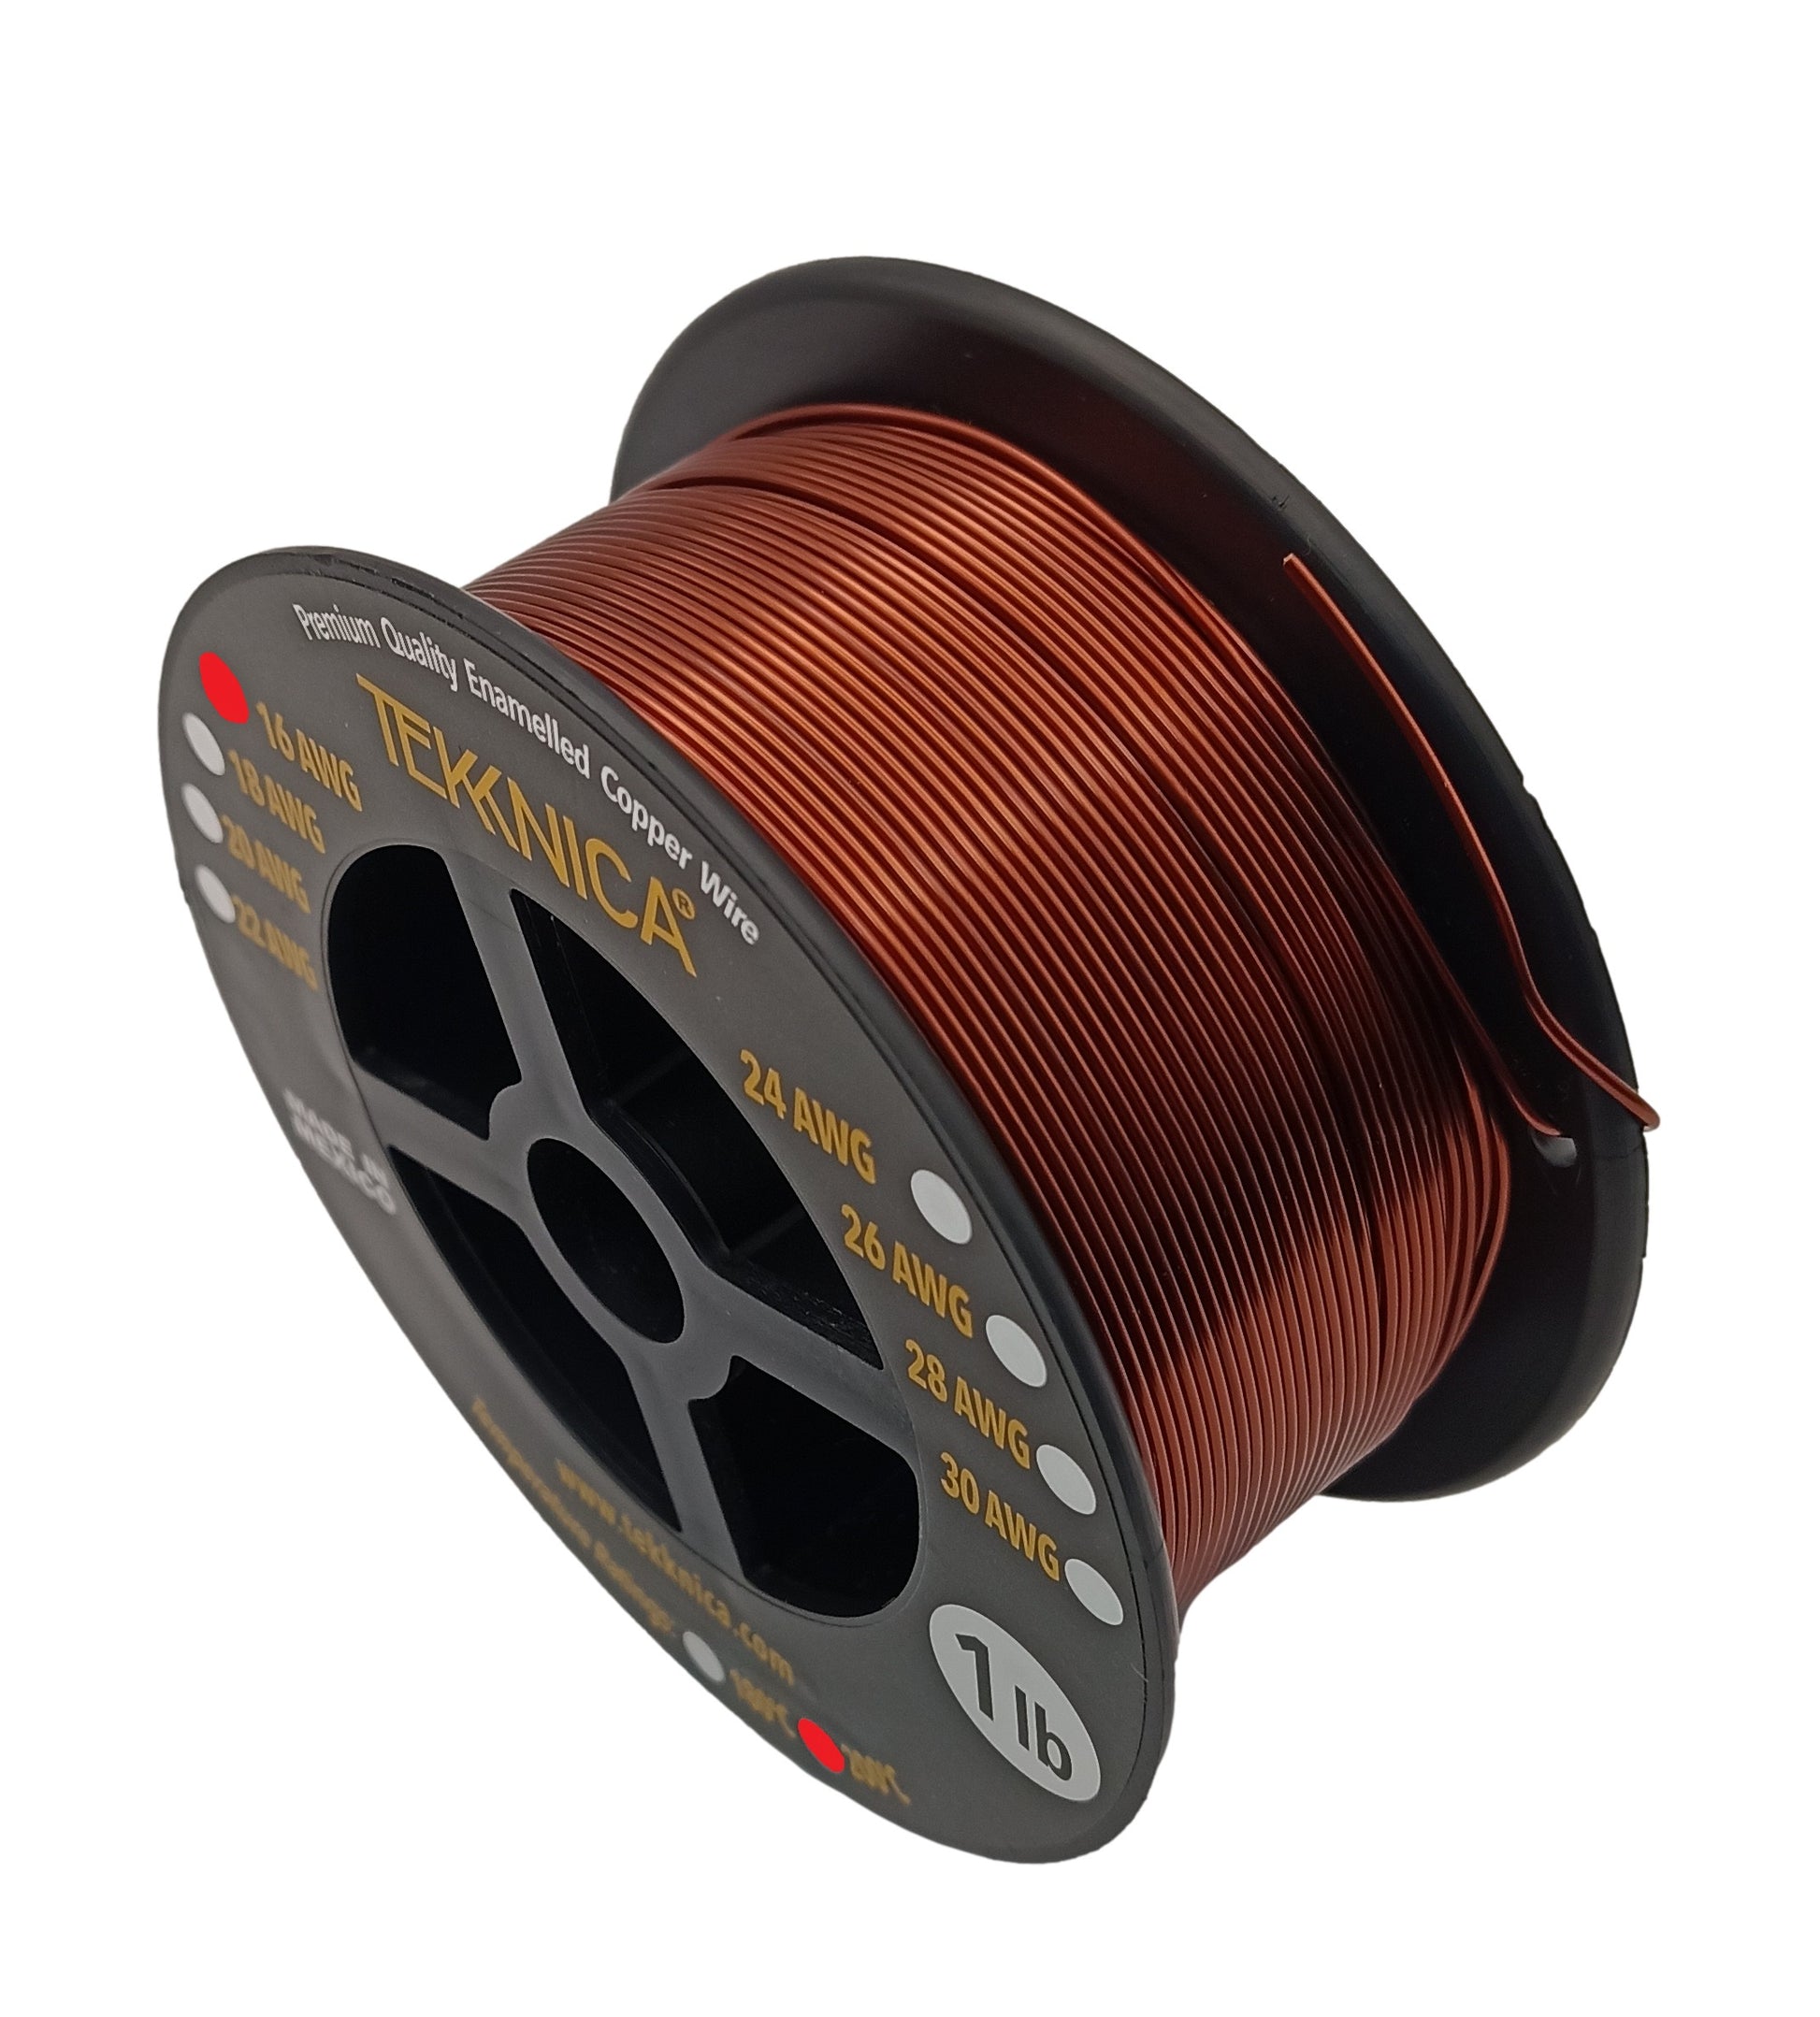 Magnet wire 1Lb Spool of 16 AWG Magnet Wire (MW-36AWG-1)